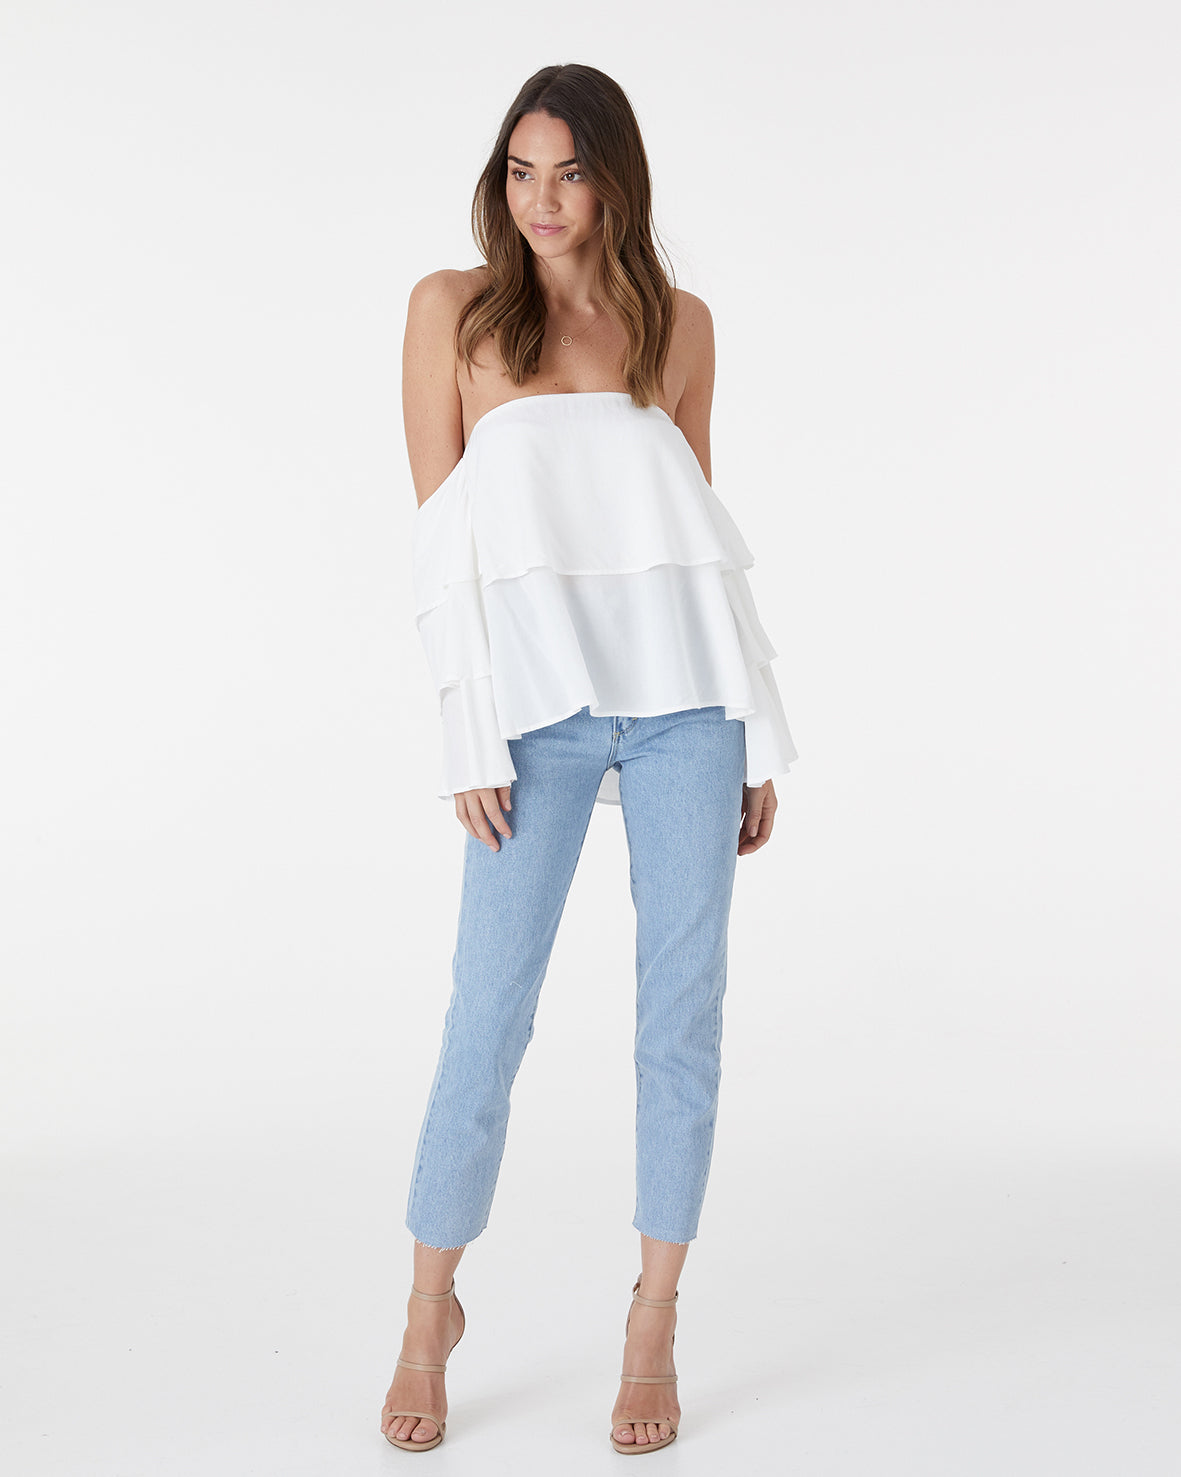 WAVES TOP - WHITE